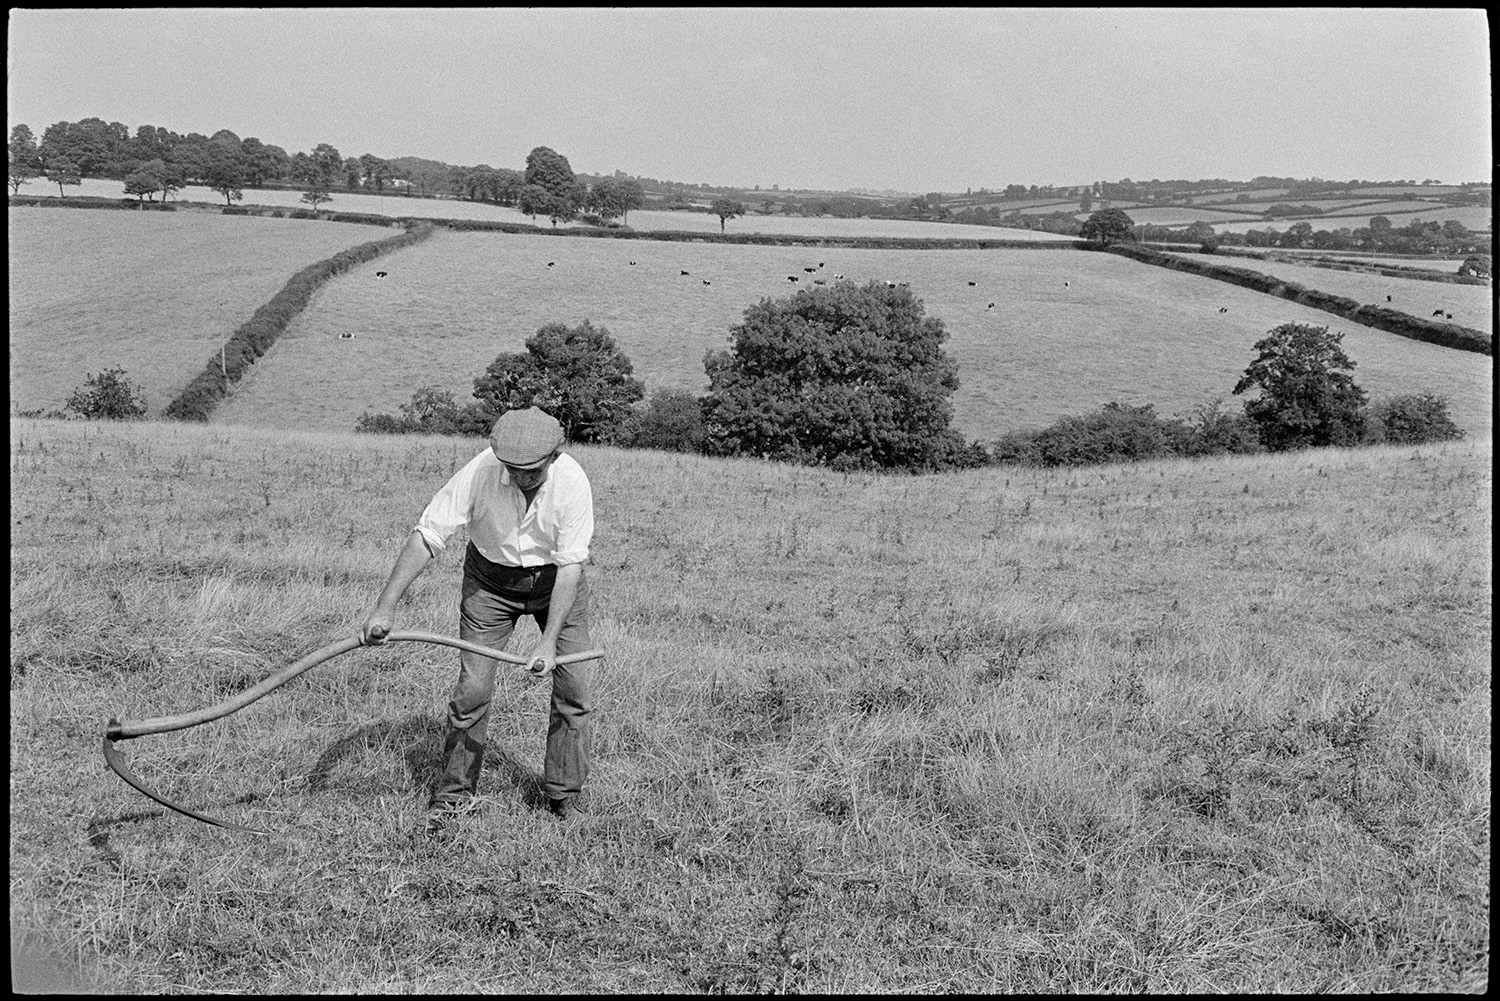 Farmer scything thistles in field during drought. 
[A man using a scythe to cut thistles in a field at Westpark, Iddesleigh during a drought. Livestock can be seen grazing in a field in the background.]